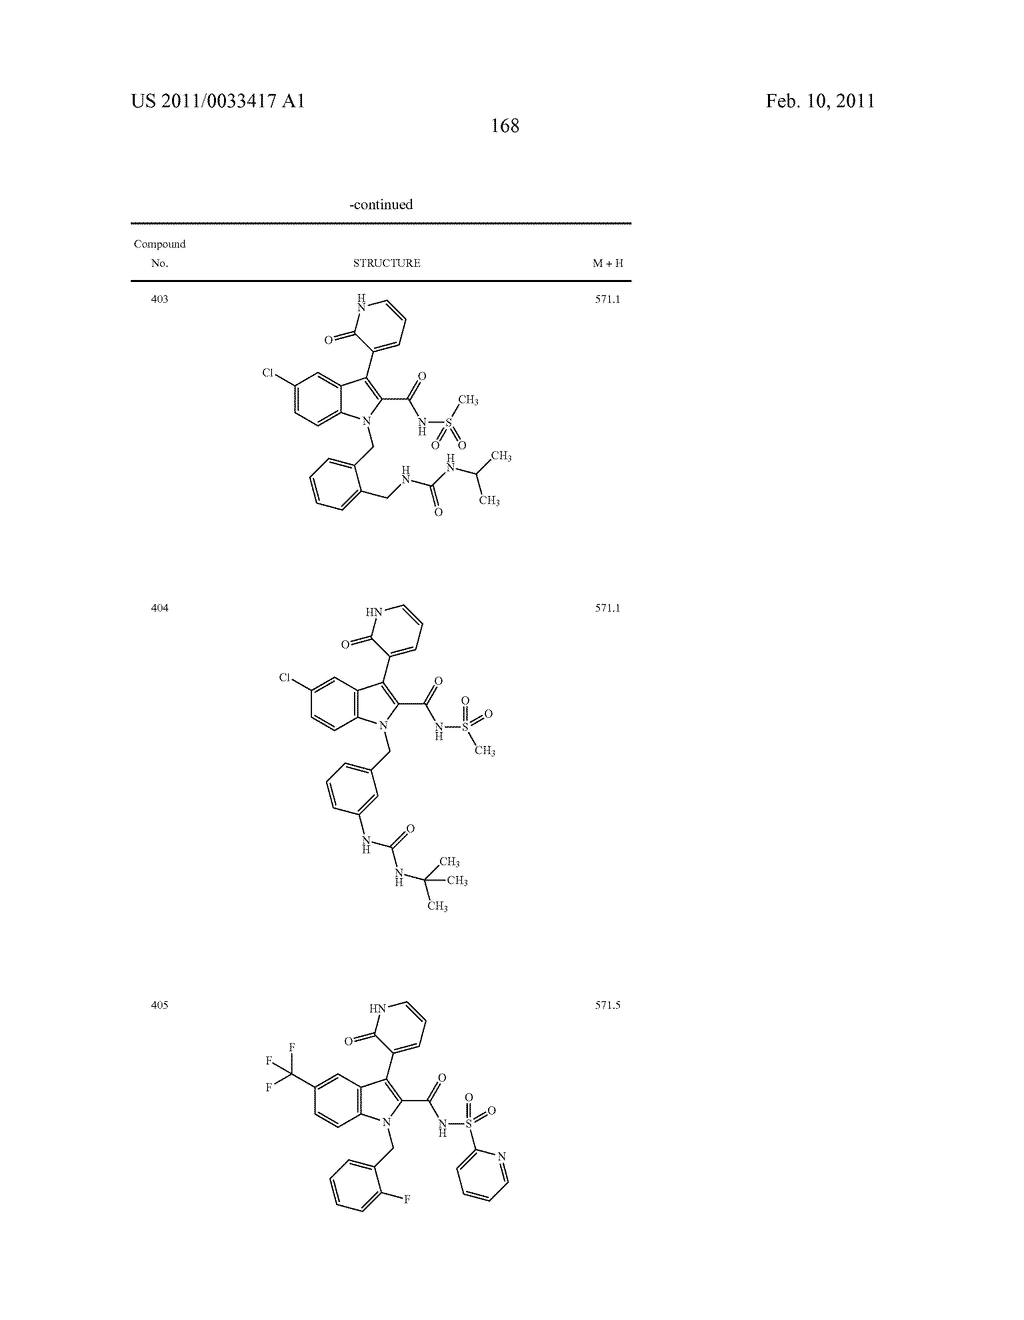 2,3-SUBSTITUTED INDOLE DERIVATIVES FOR TREATING VIRAL INFECTIONS - diagram, schematic, and image 169